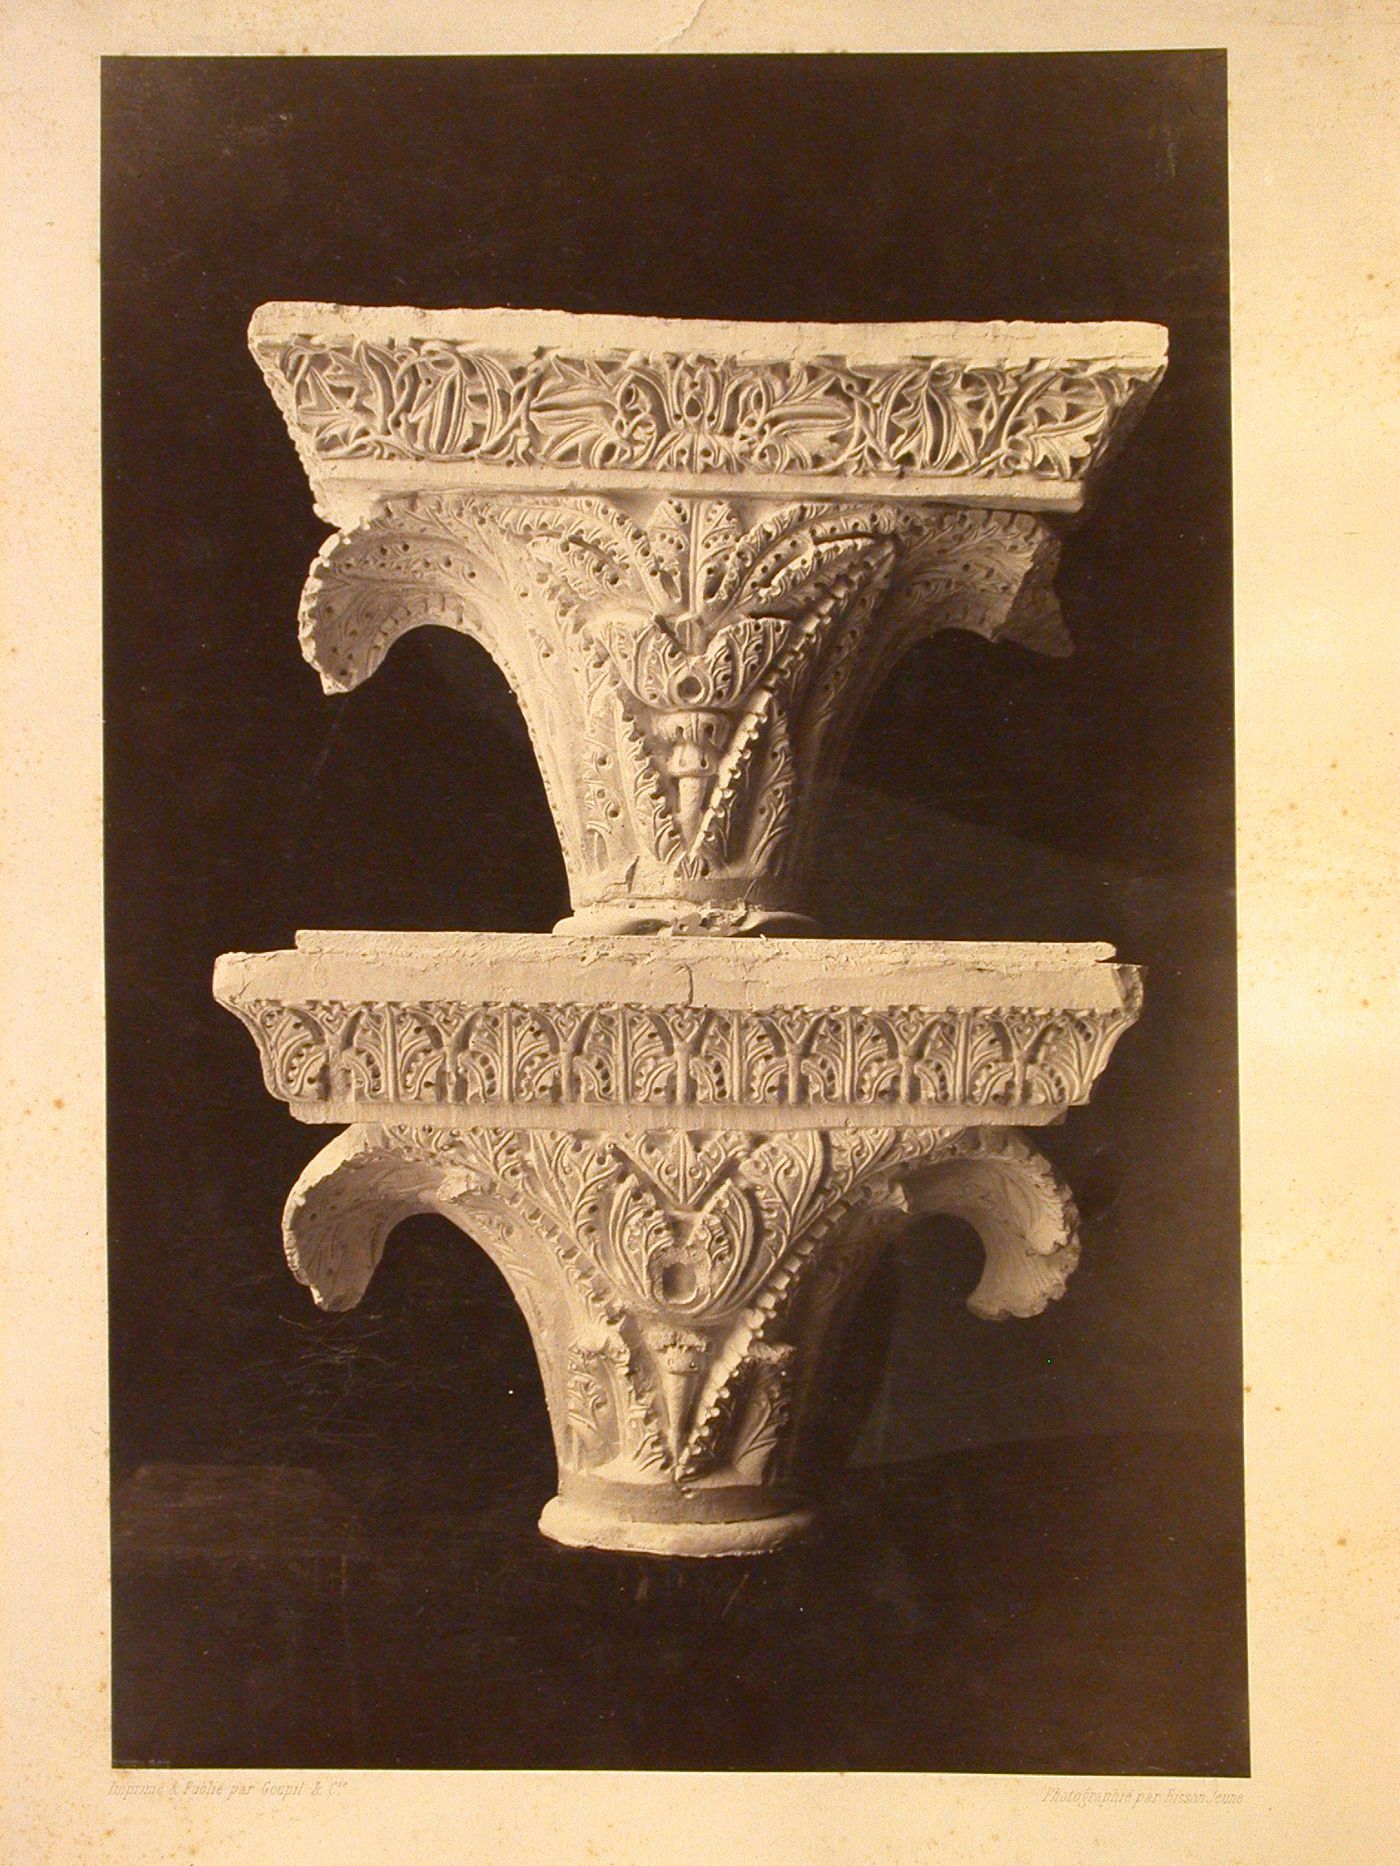 Roman(esque ?) capitals from the pulpit ? of baptistry at Pisa (plaster casts), Pisa, Italy